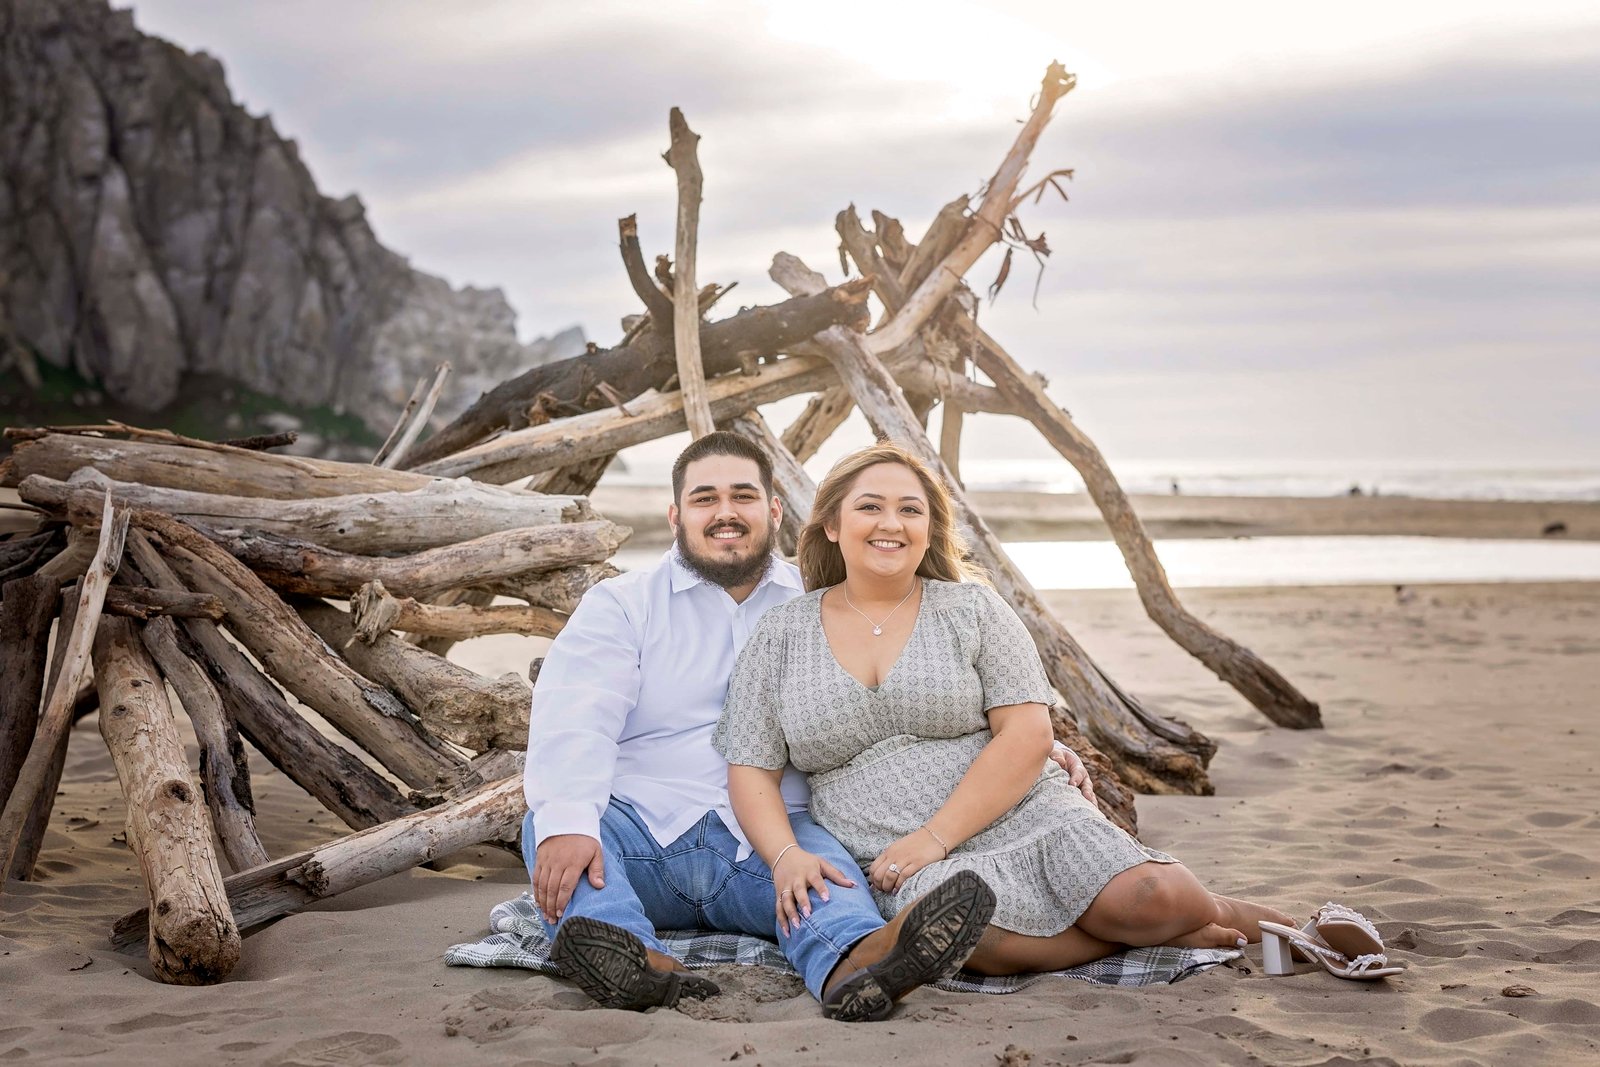 couple smiling at the camera while sitting in the sand in front of some driftwood